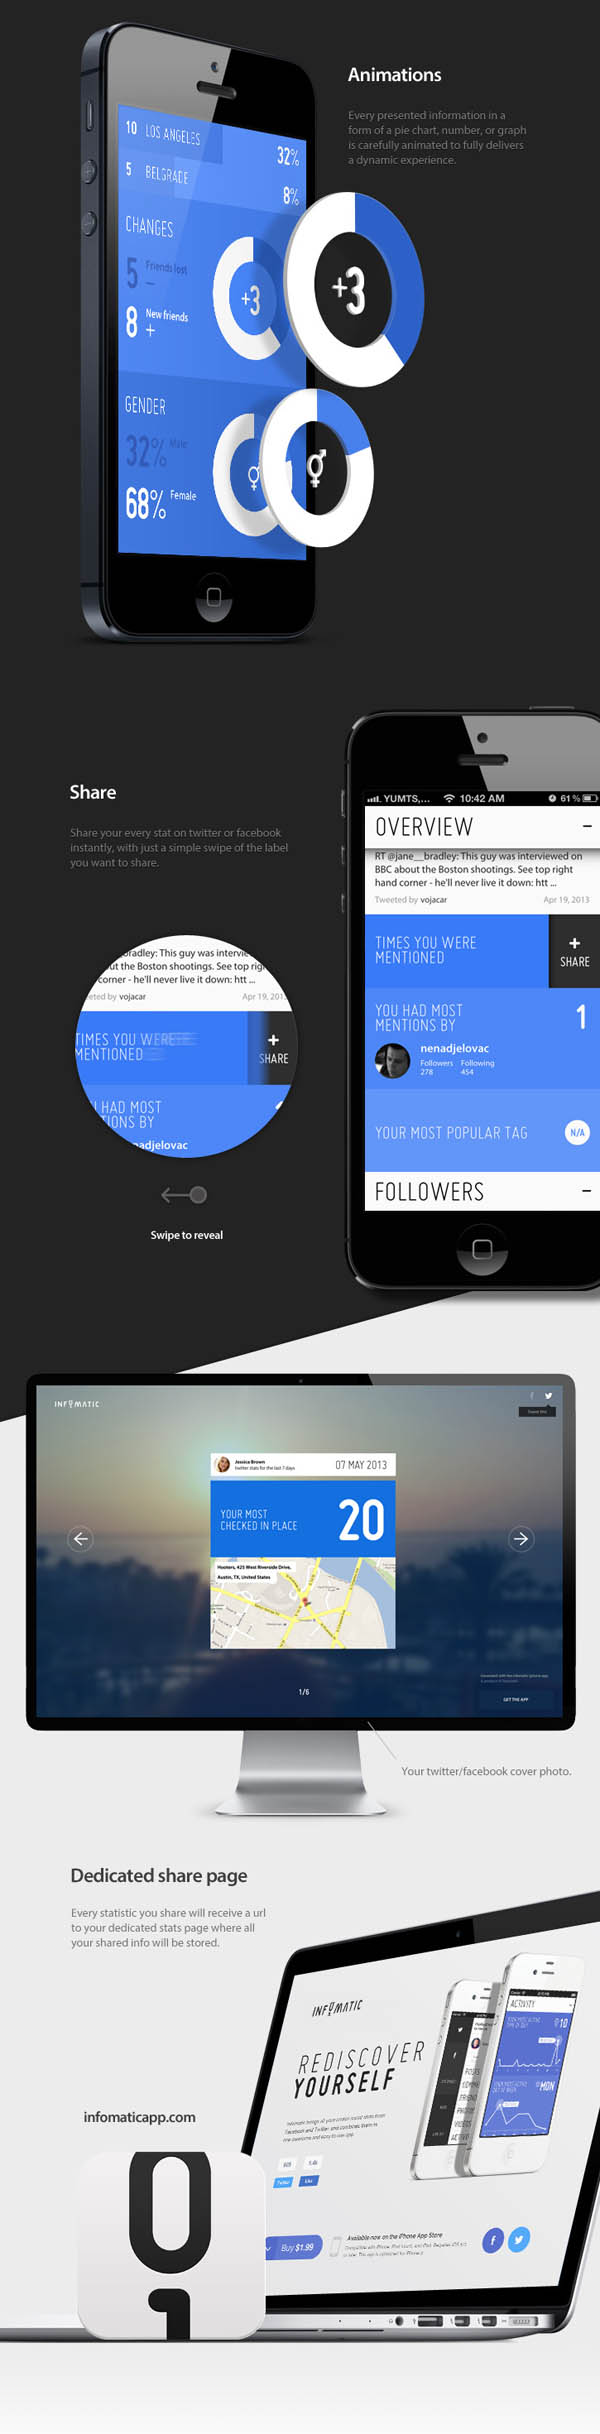 Infomatic - Social Stats in one App - Design and Development by Saturized